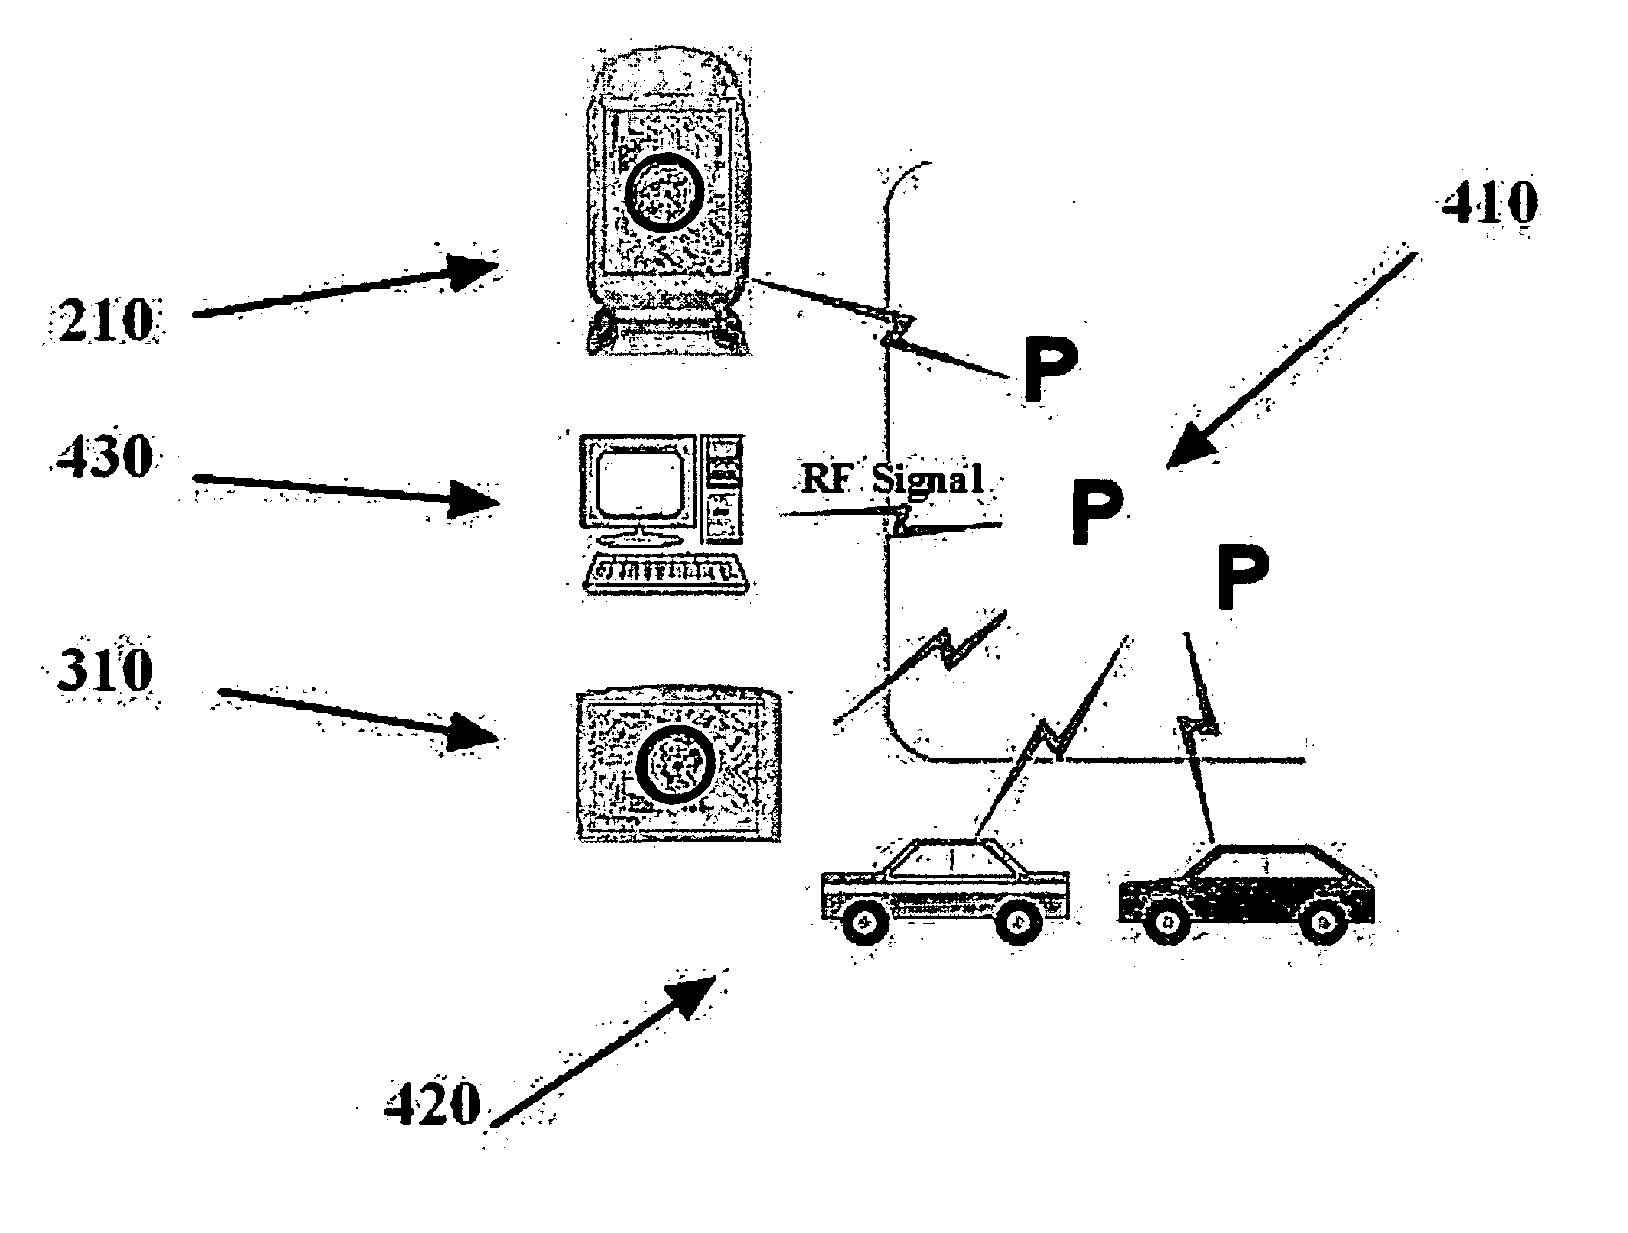 Parking detector - a system and method for detecting and navigating to empty parking spaces utilizing a cellular phone application